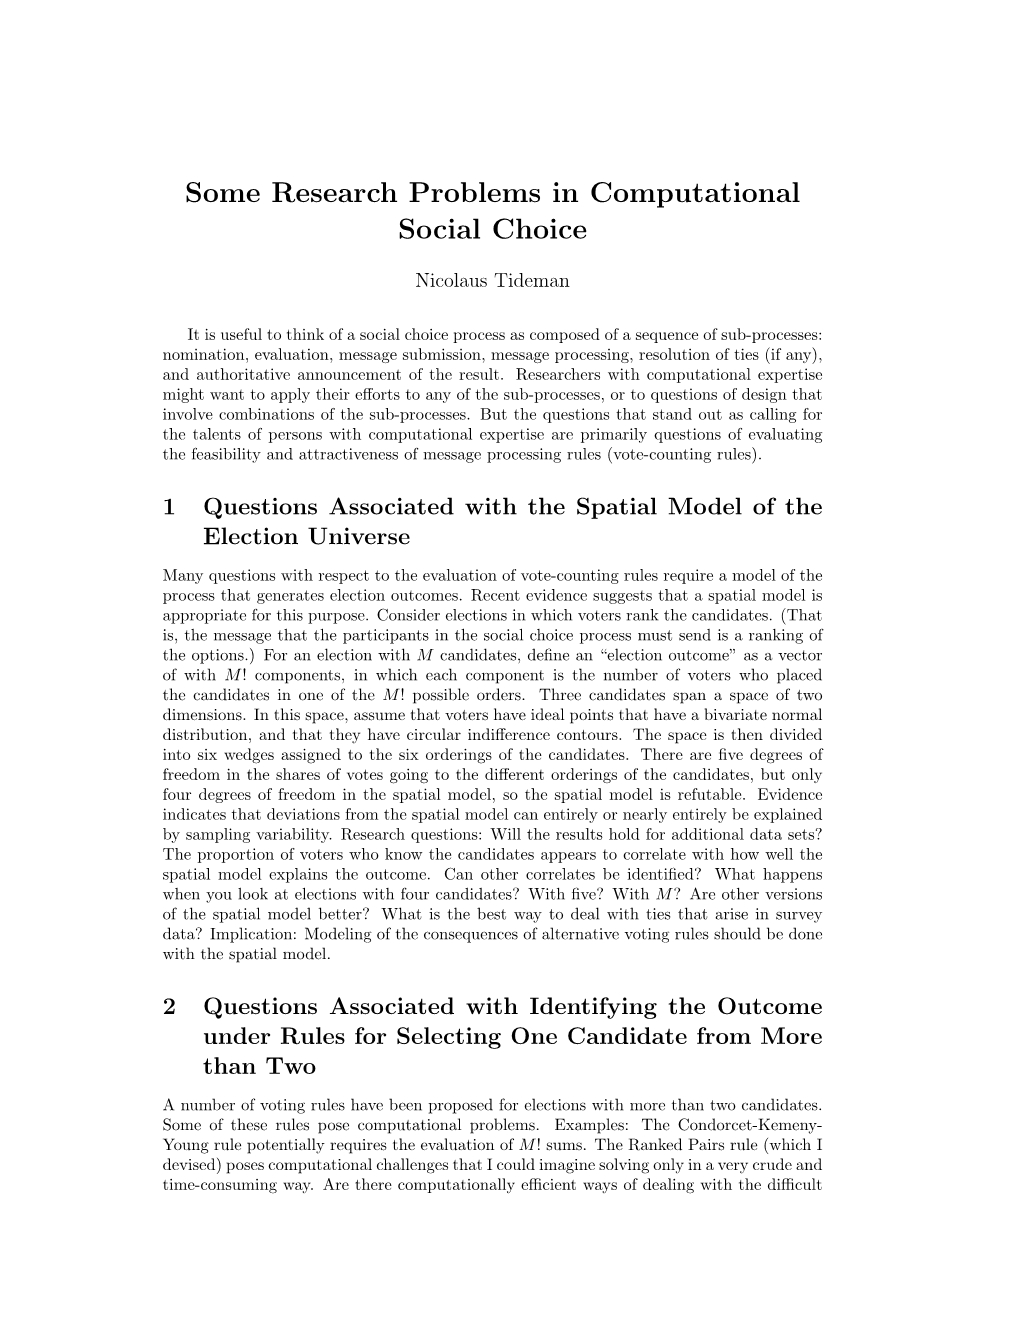 Some Research Problems in Computational Social Choice